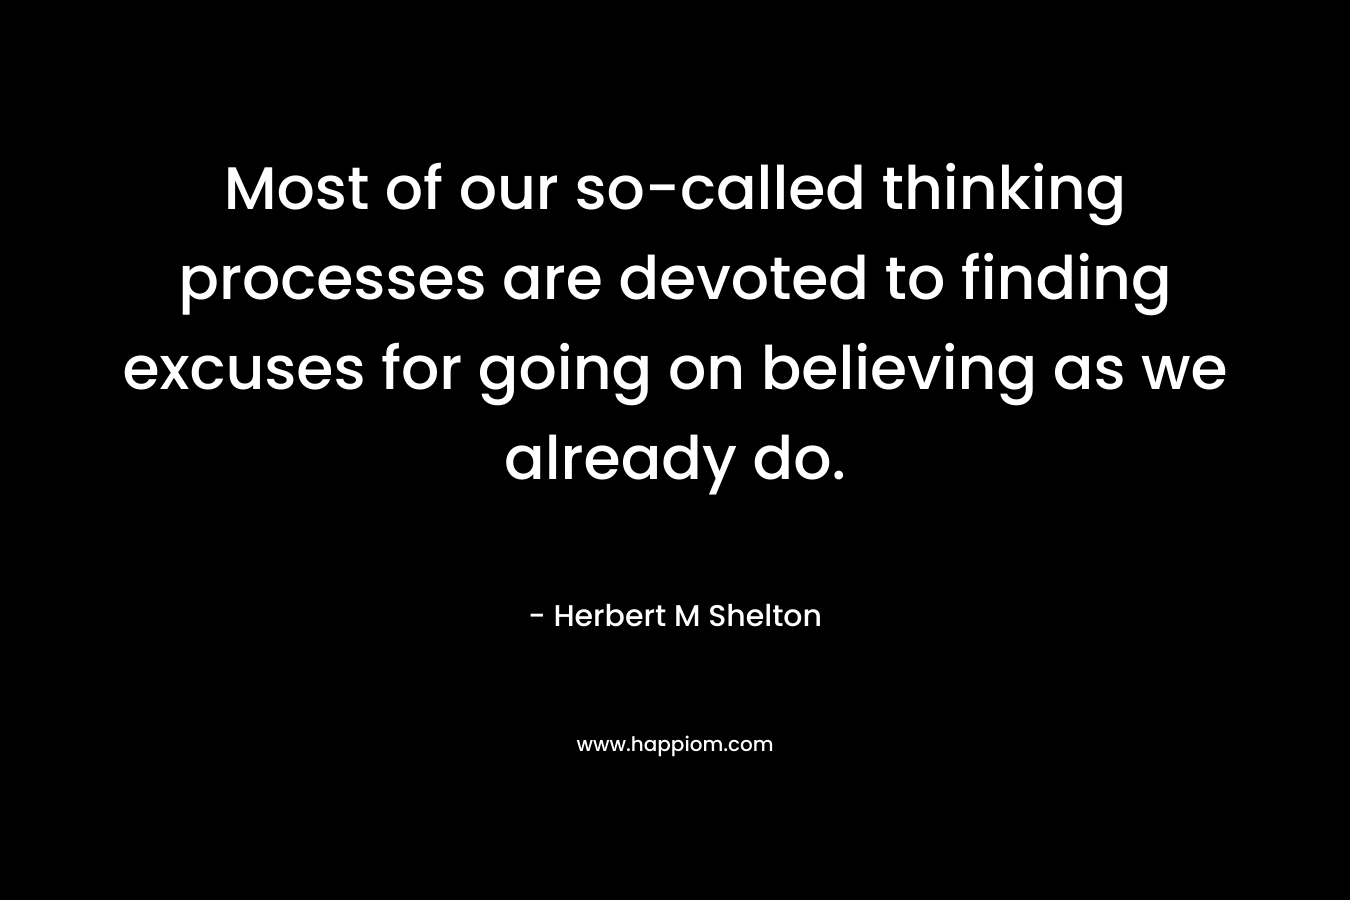 Most of our so-called thinking processes are devoted to finding excuses for going on believing as we already do.  – Herbert M Shelton